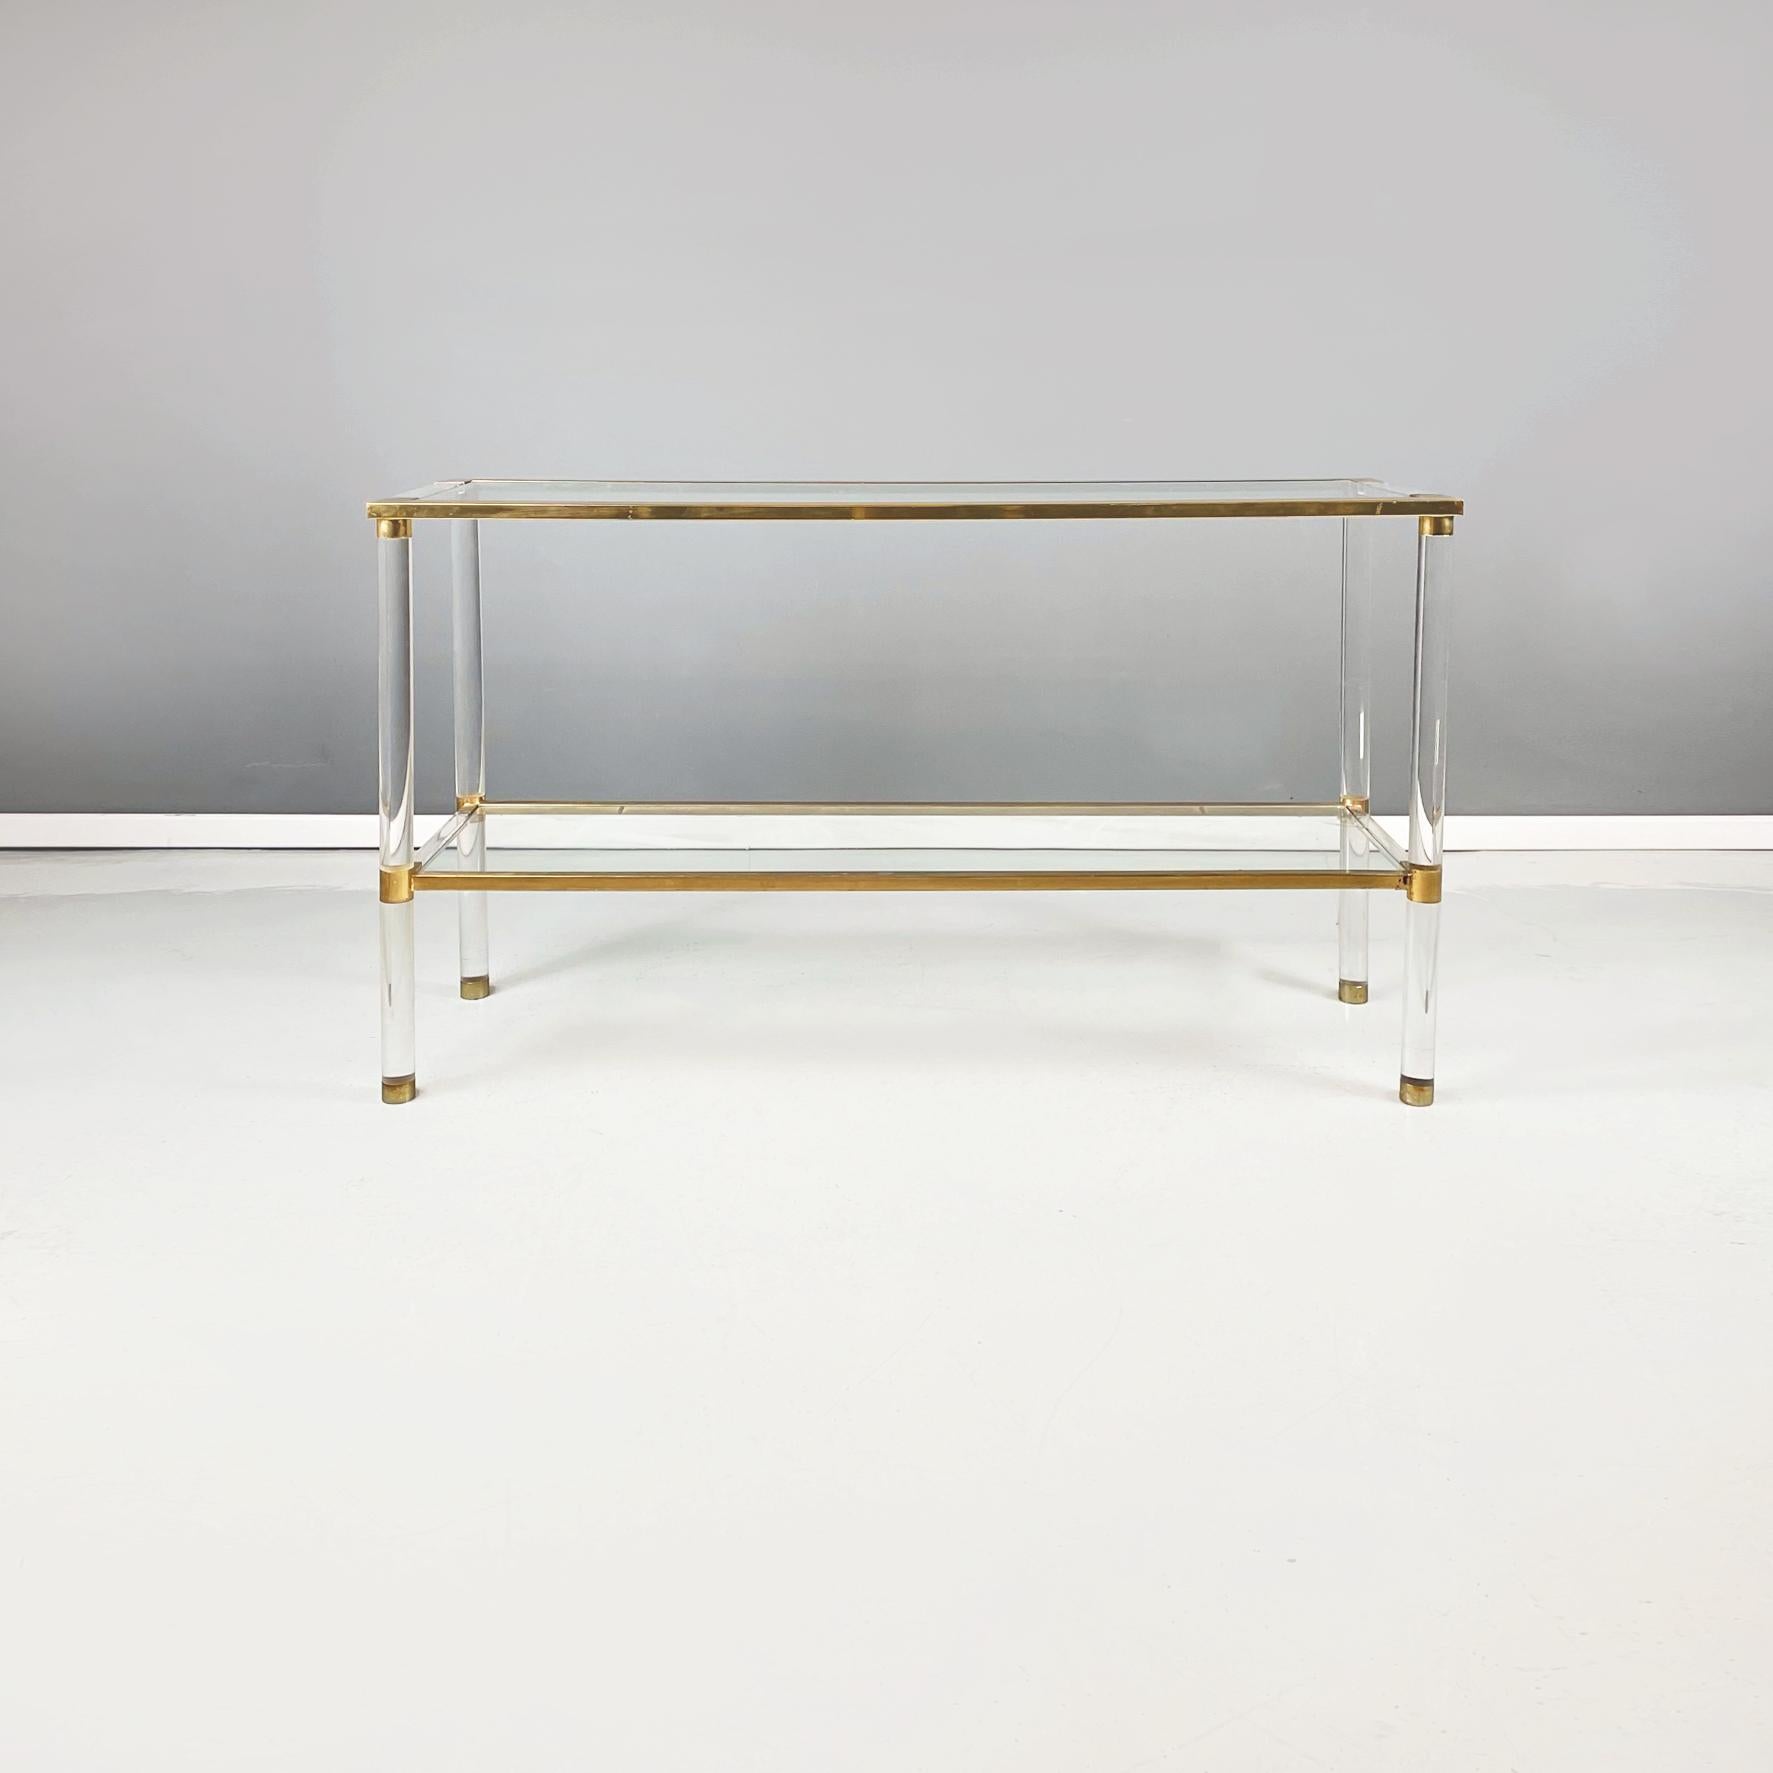 Italian modern console with 2 shelfs in plexiglass, glass and brass, 1970s.
Console with double rectangular shelf in plexiglass, glass and brass. The two glass shelfs are supported by a brass structure with transparent plexiglass parts. The round